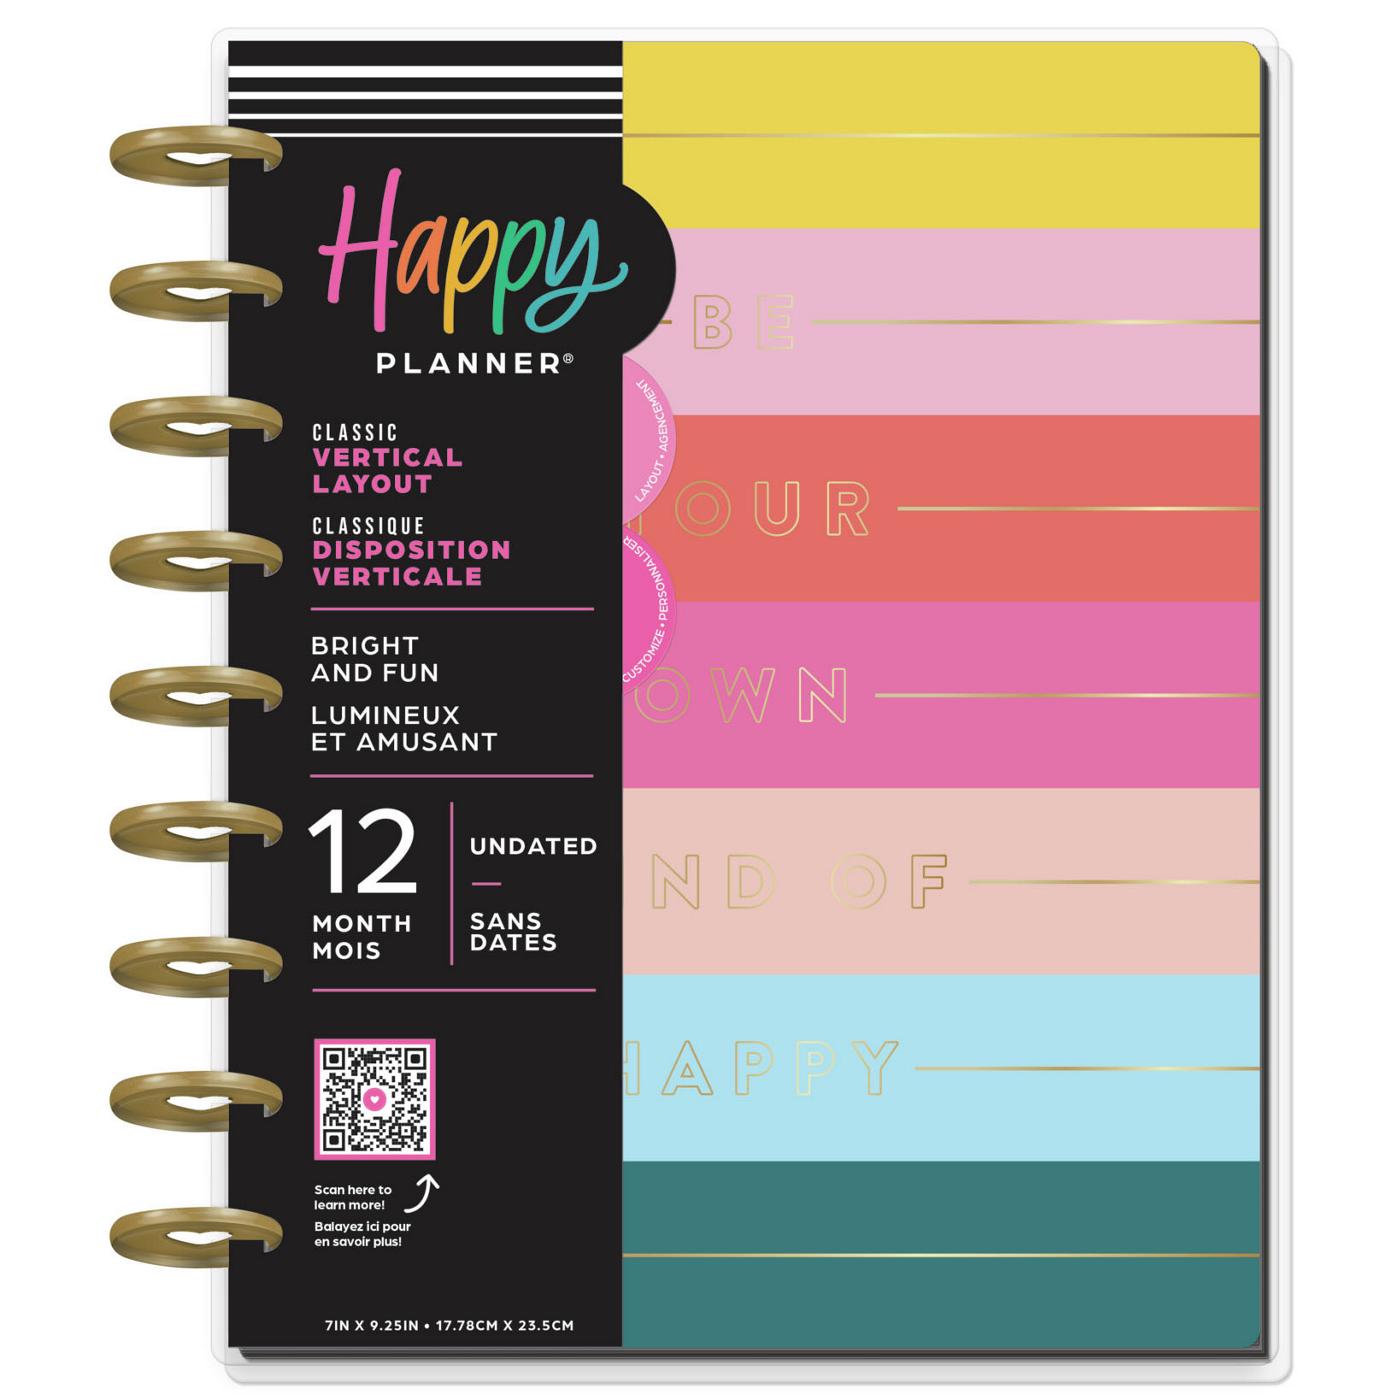 The Happy Planner Undated 12 Month Bright & Fun Classic Planner; image 1 of 3